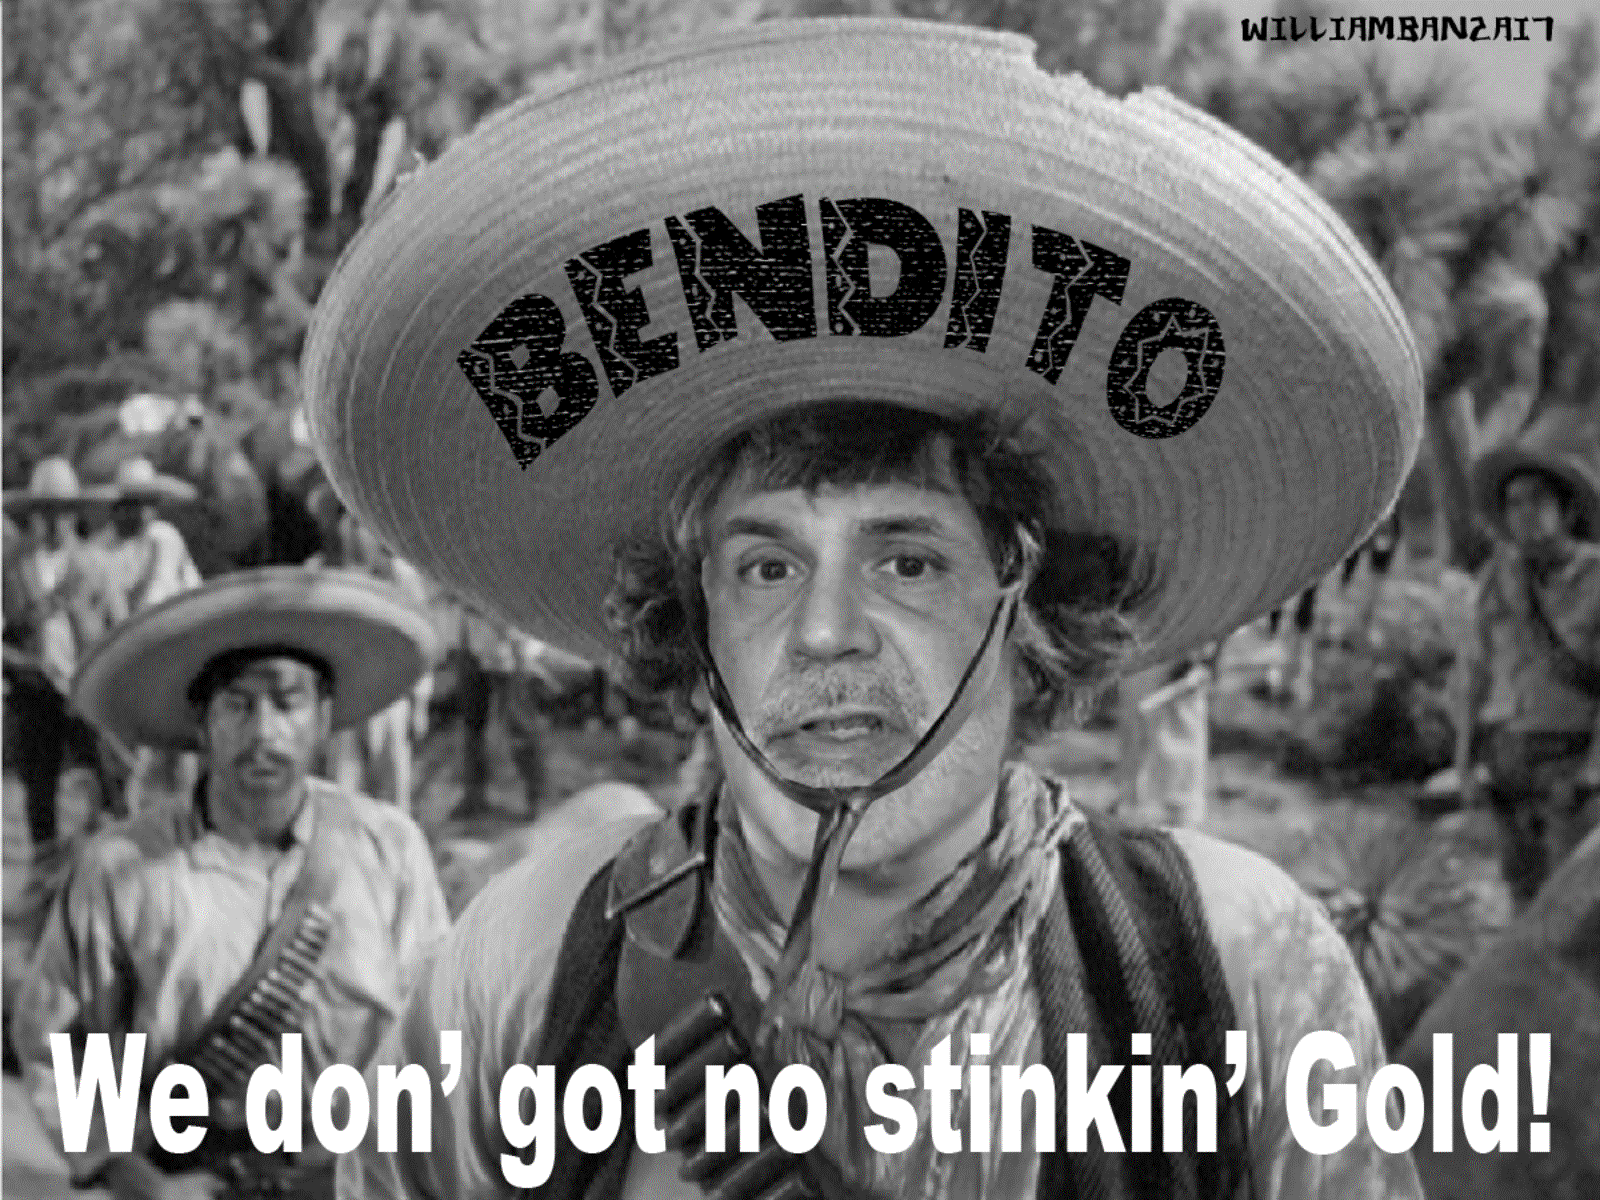 AND NOW FOR A MESSAGE TO THE BUNDESBANK FROM BENDITO BEN